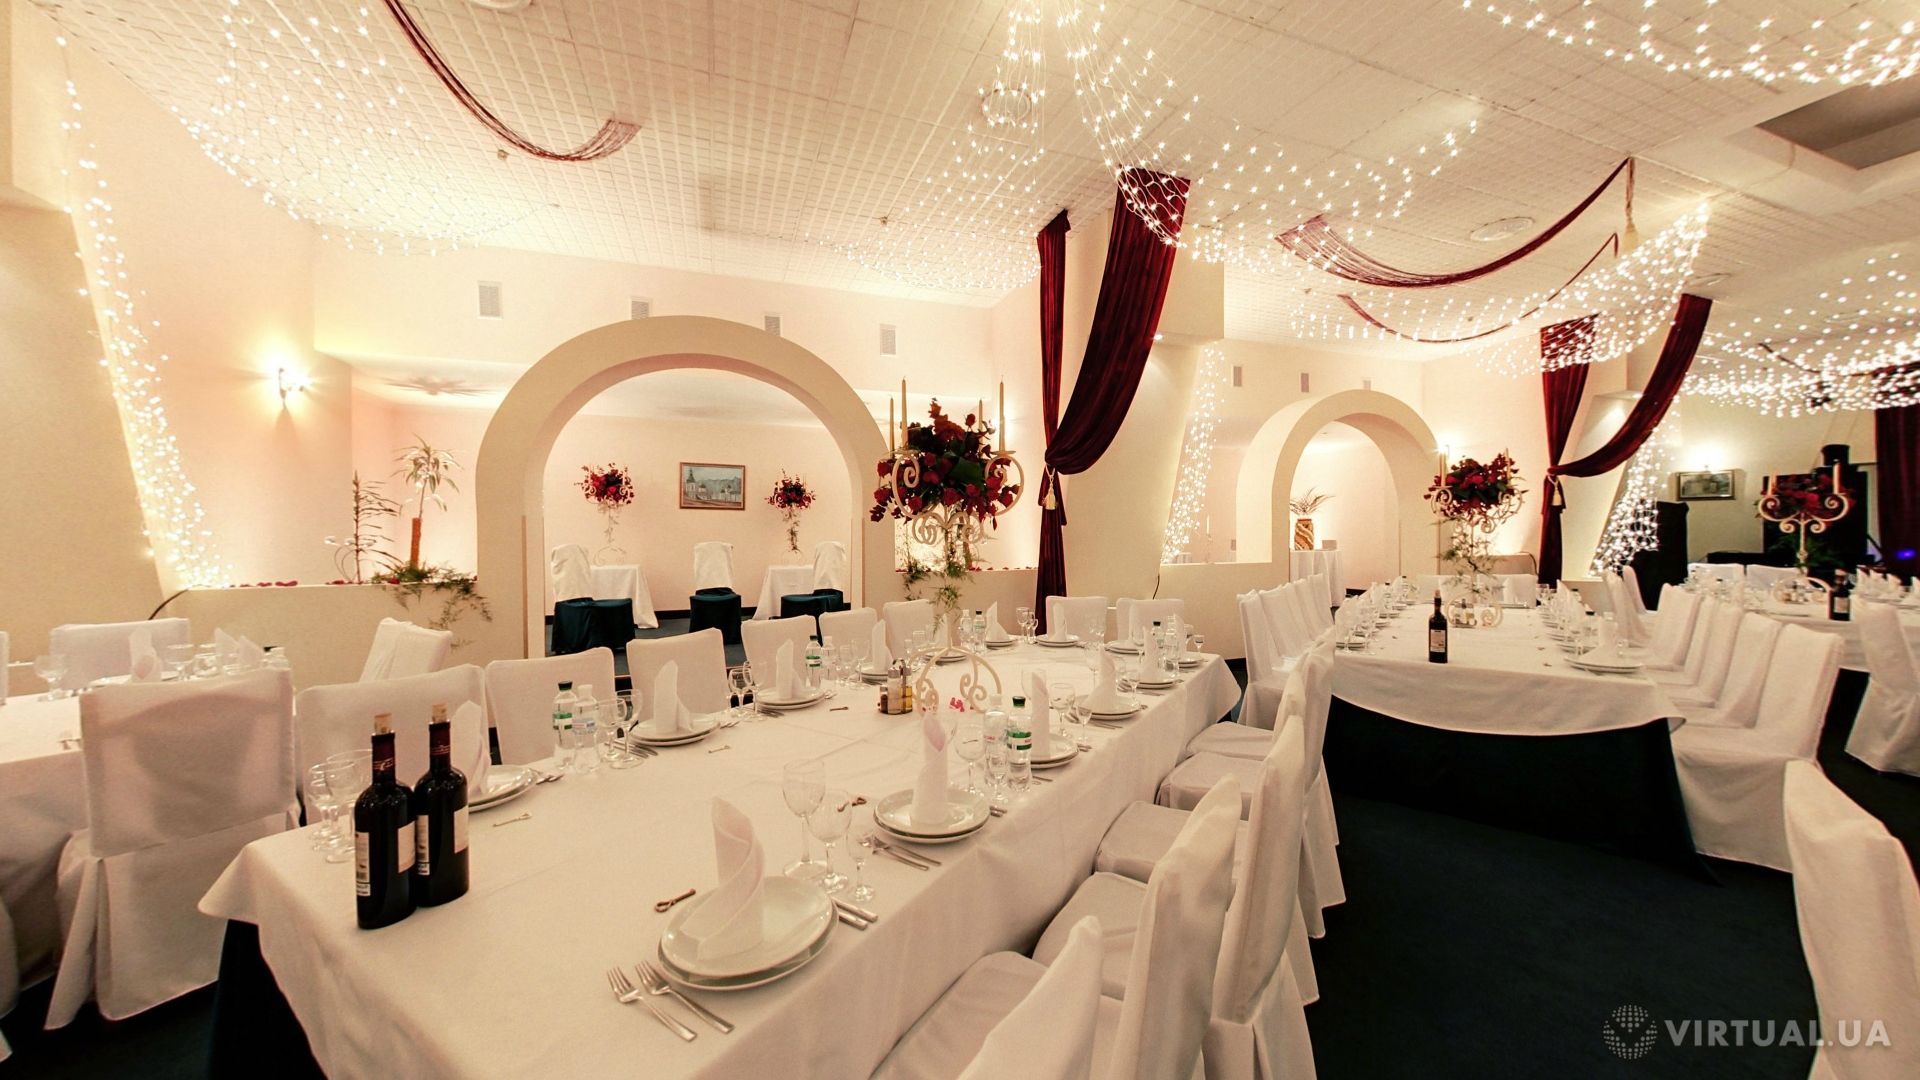 Banquet hall in Dnister Premier Hotel, photo